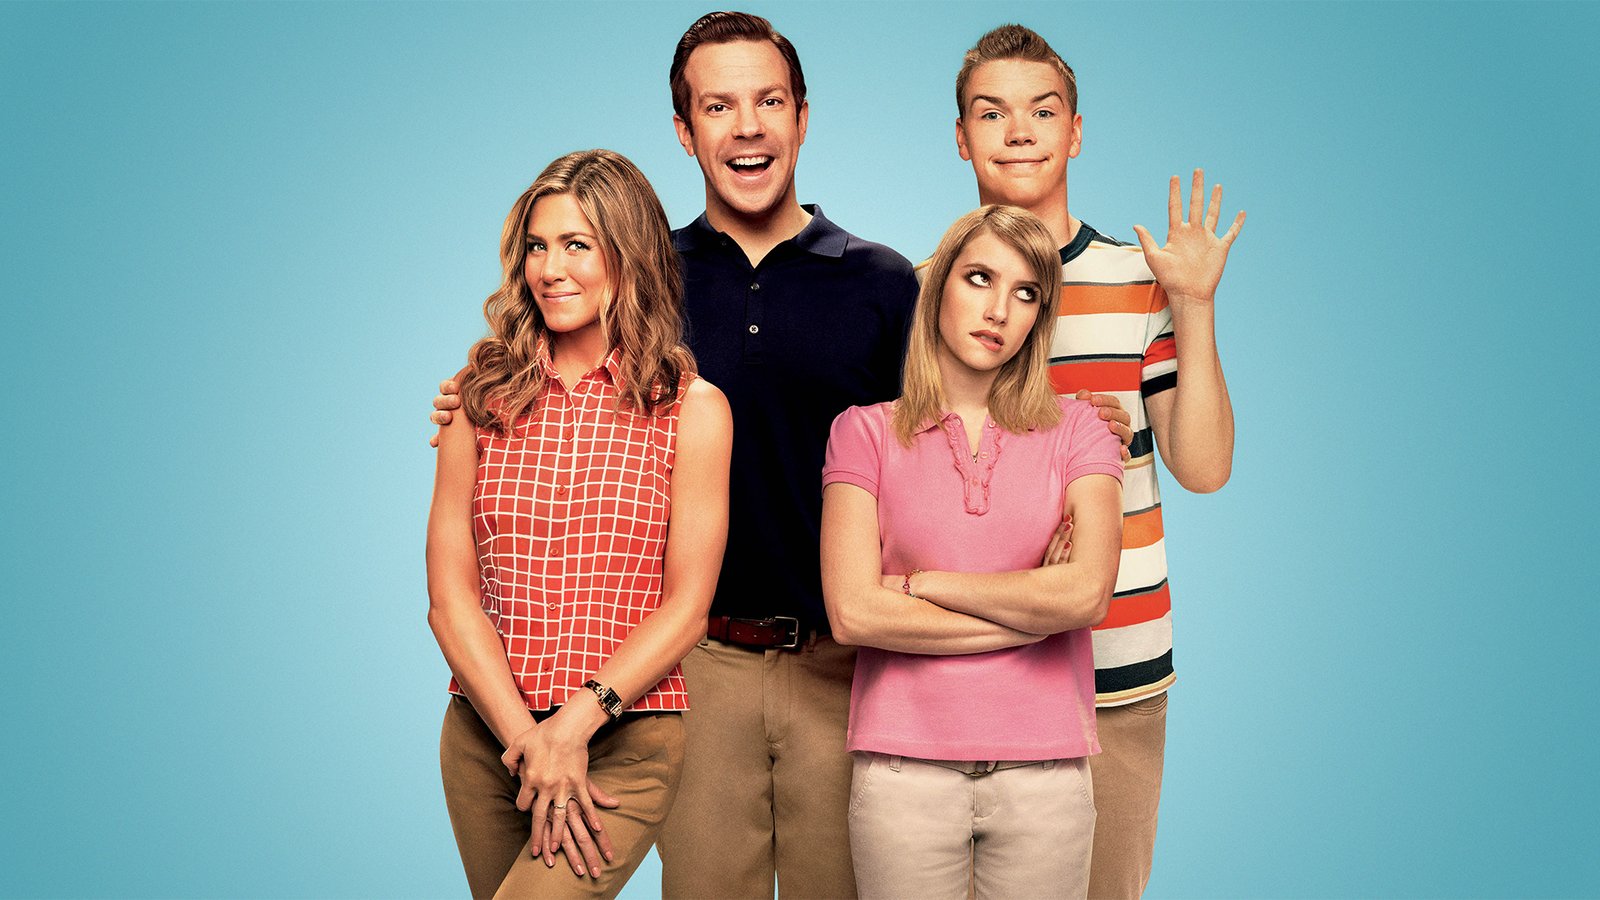  / We're the Millers